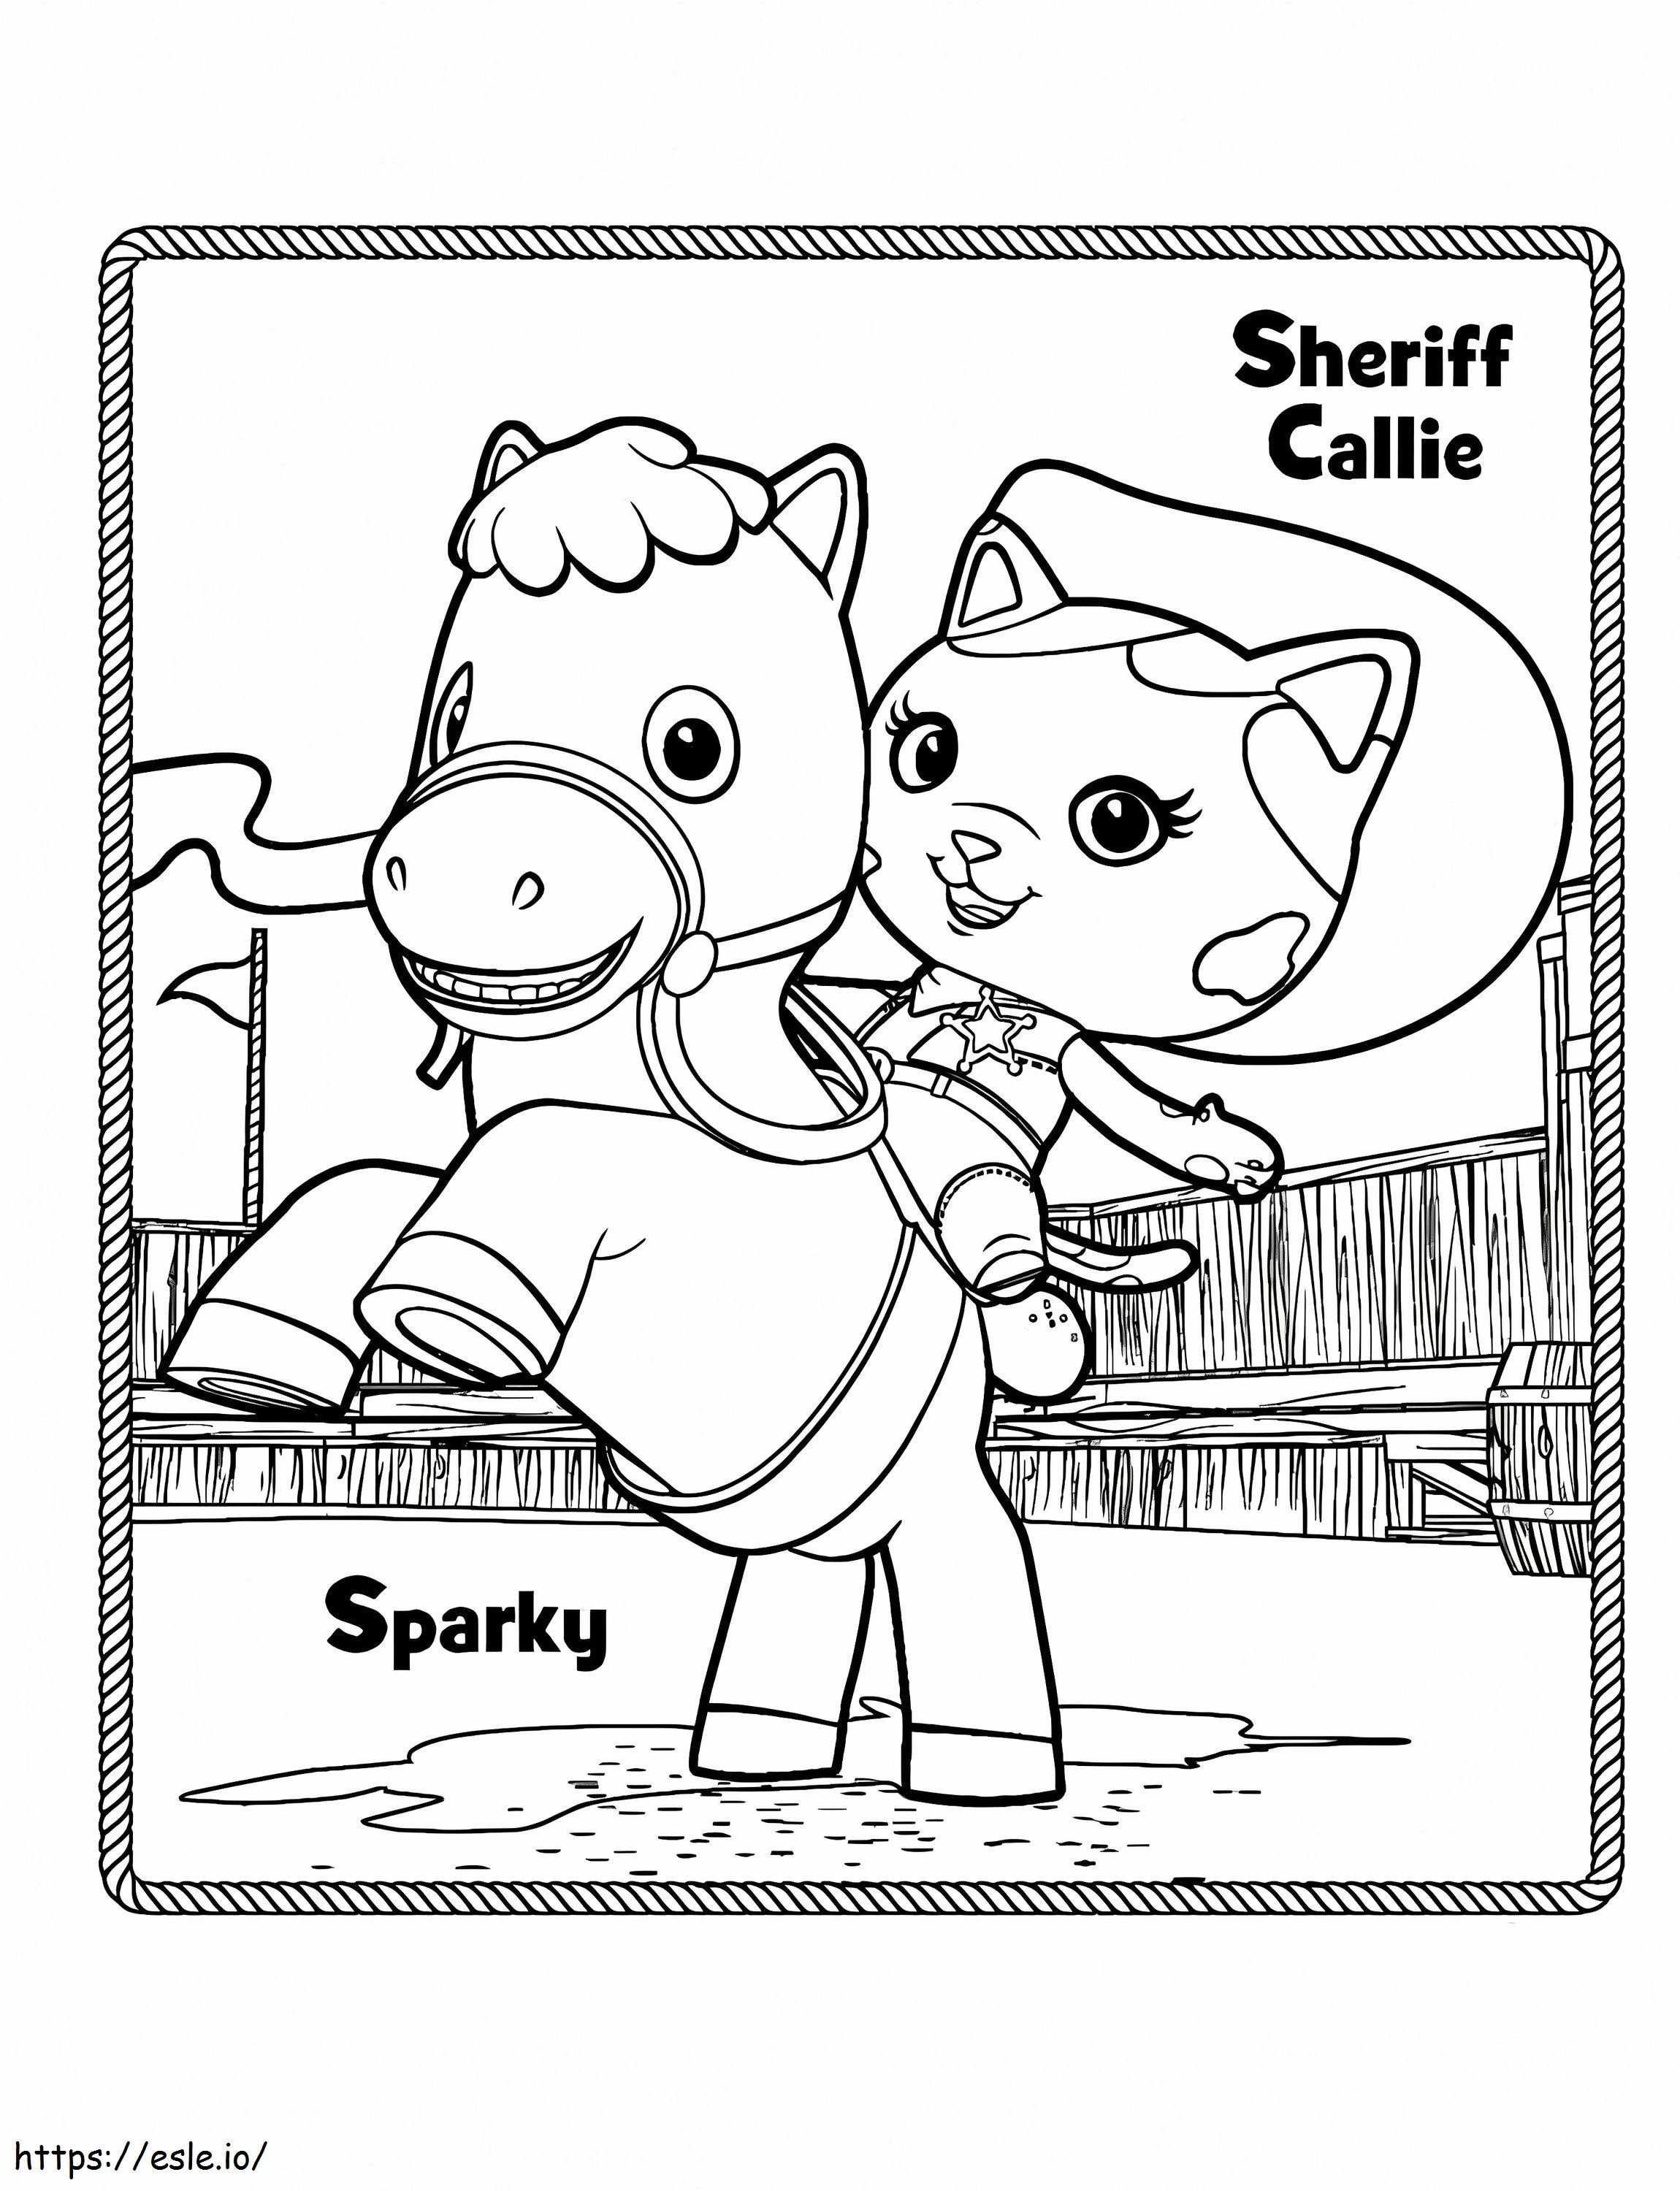 Sparky And Sheriff Callie coloring page